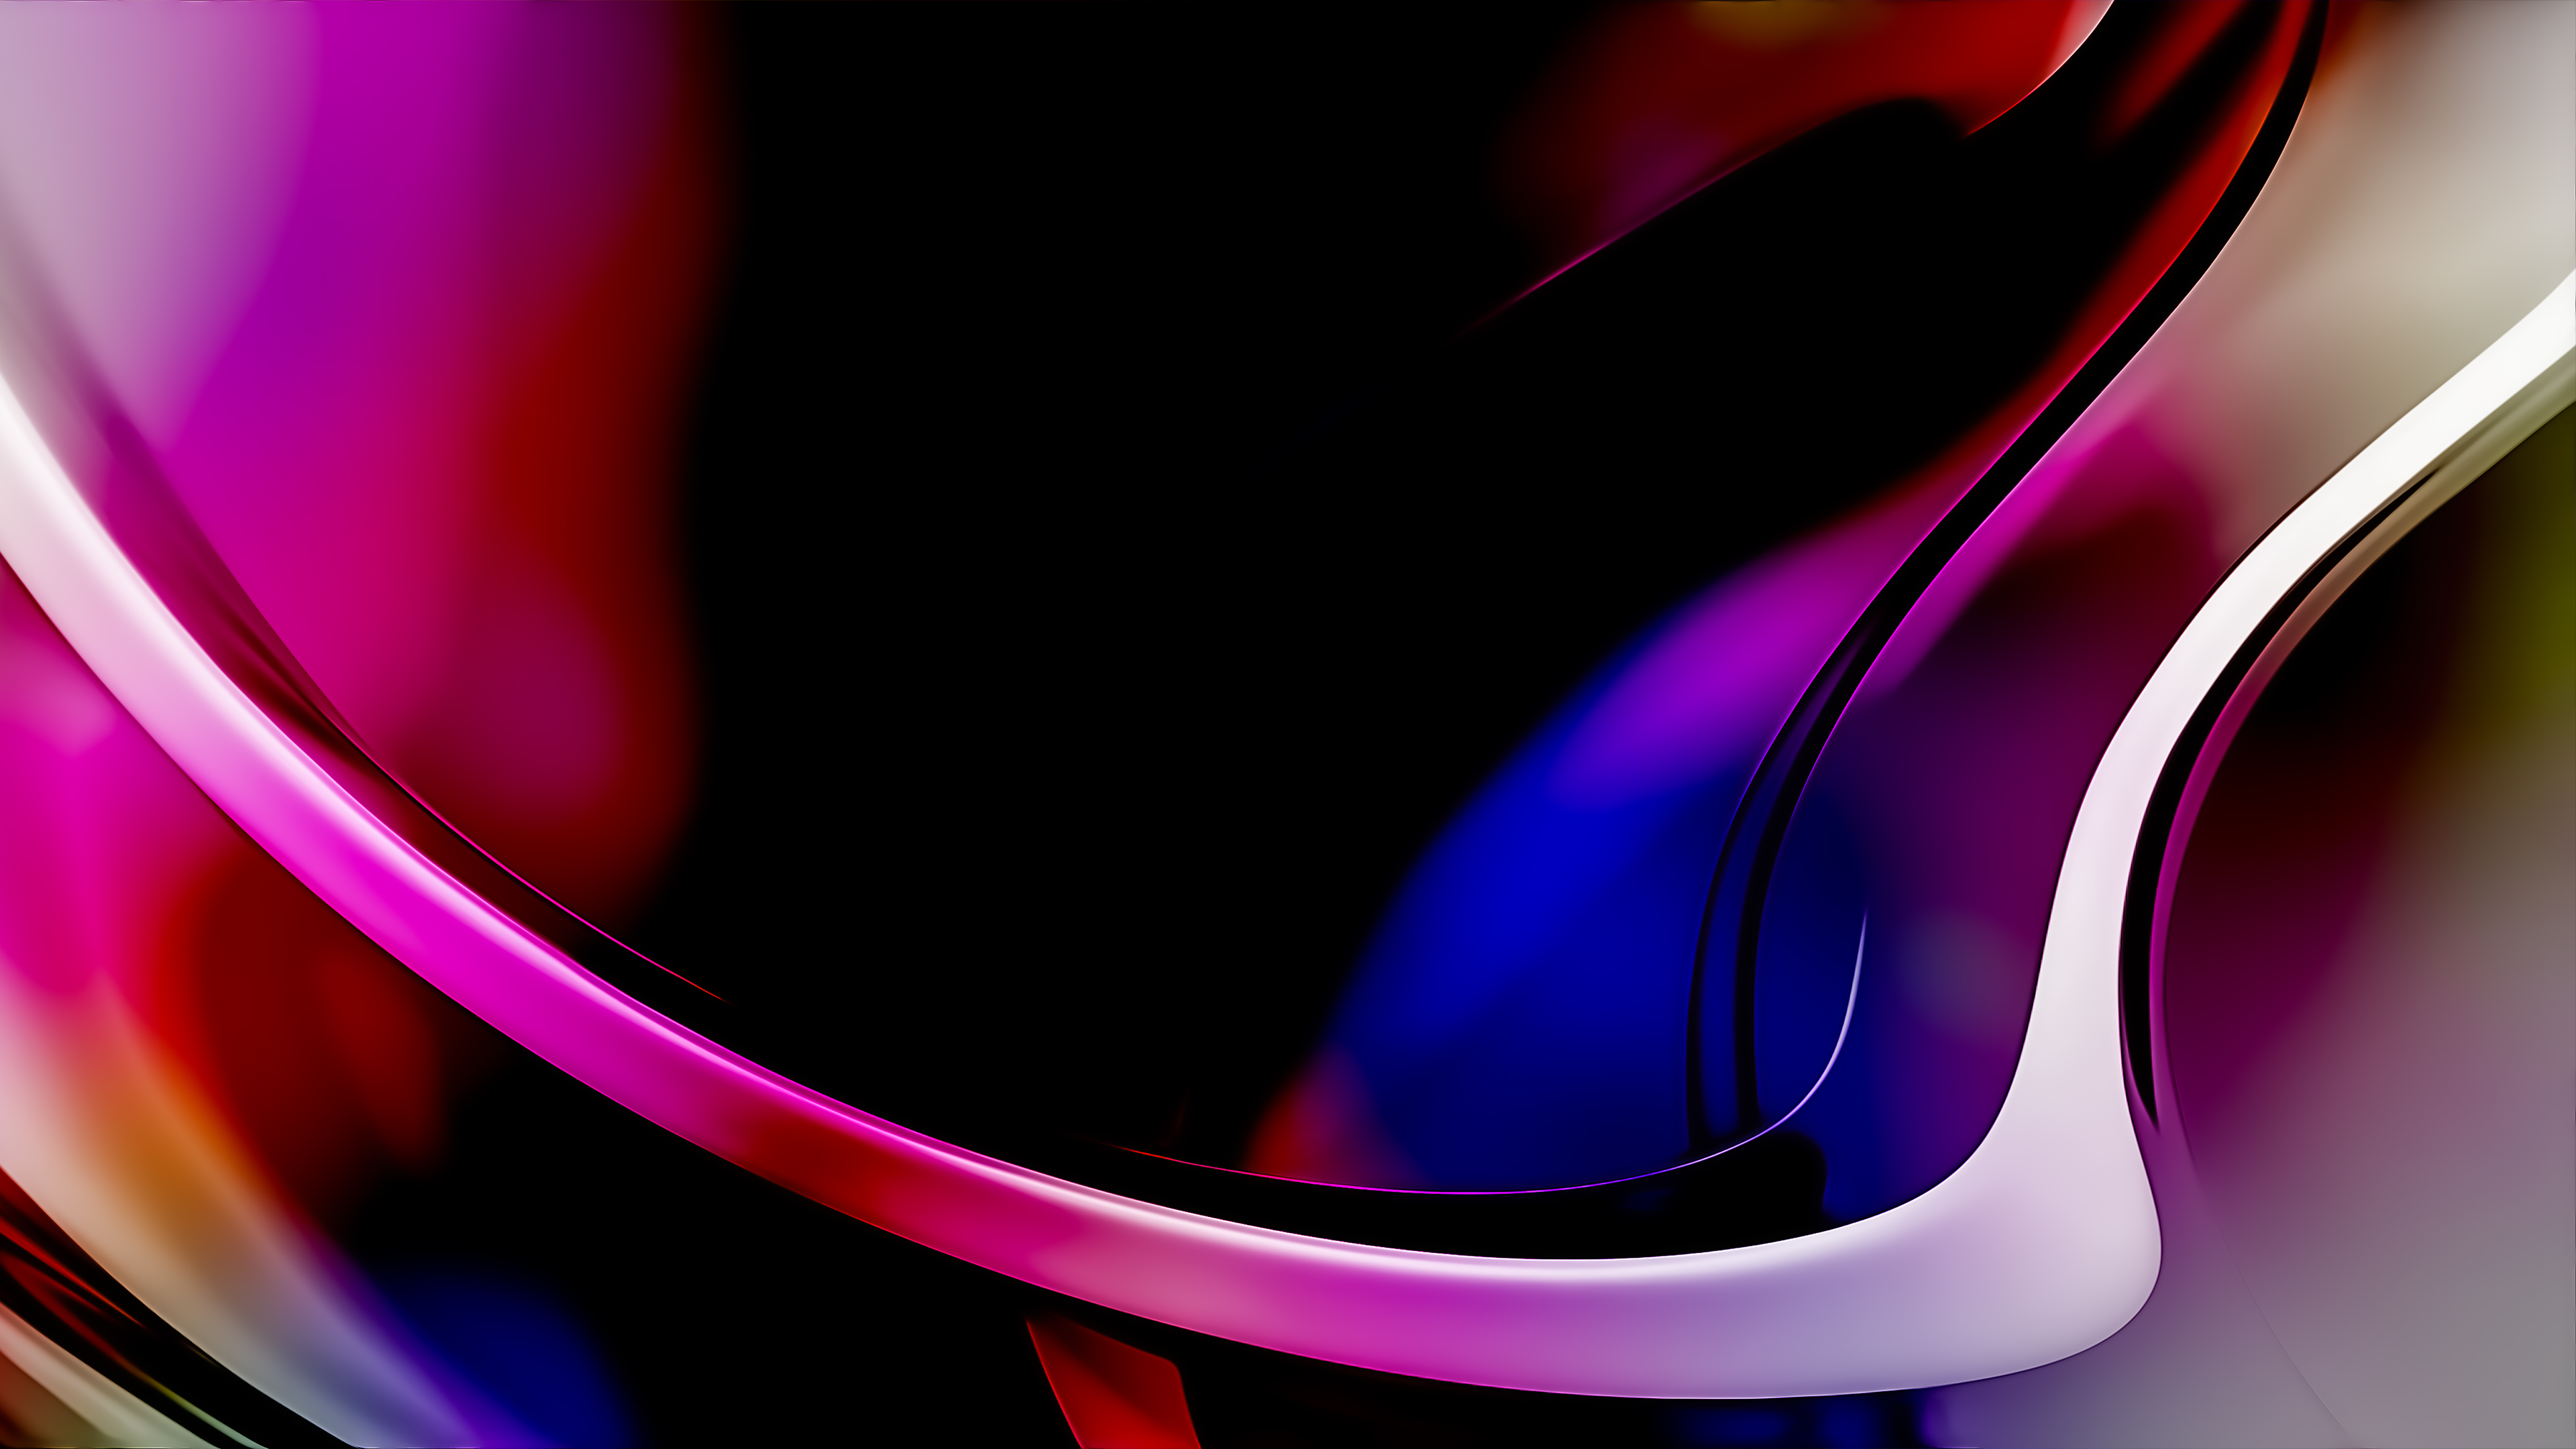 Curved figures Abstract Wallpaper 4k Ultra HD